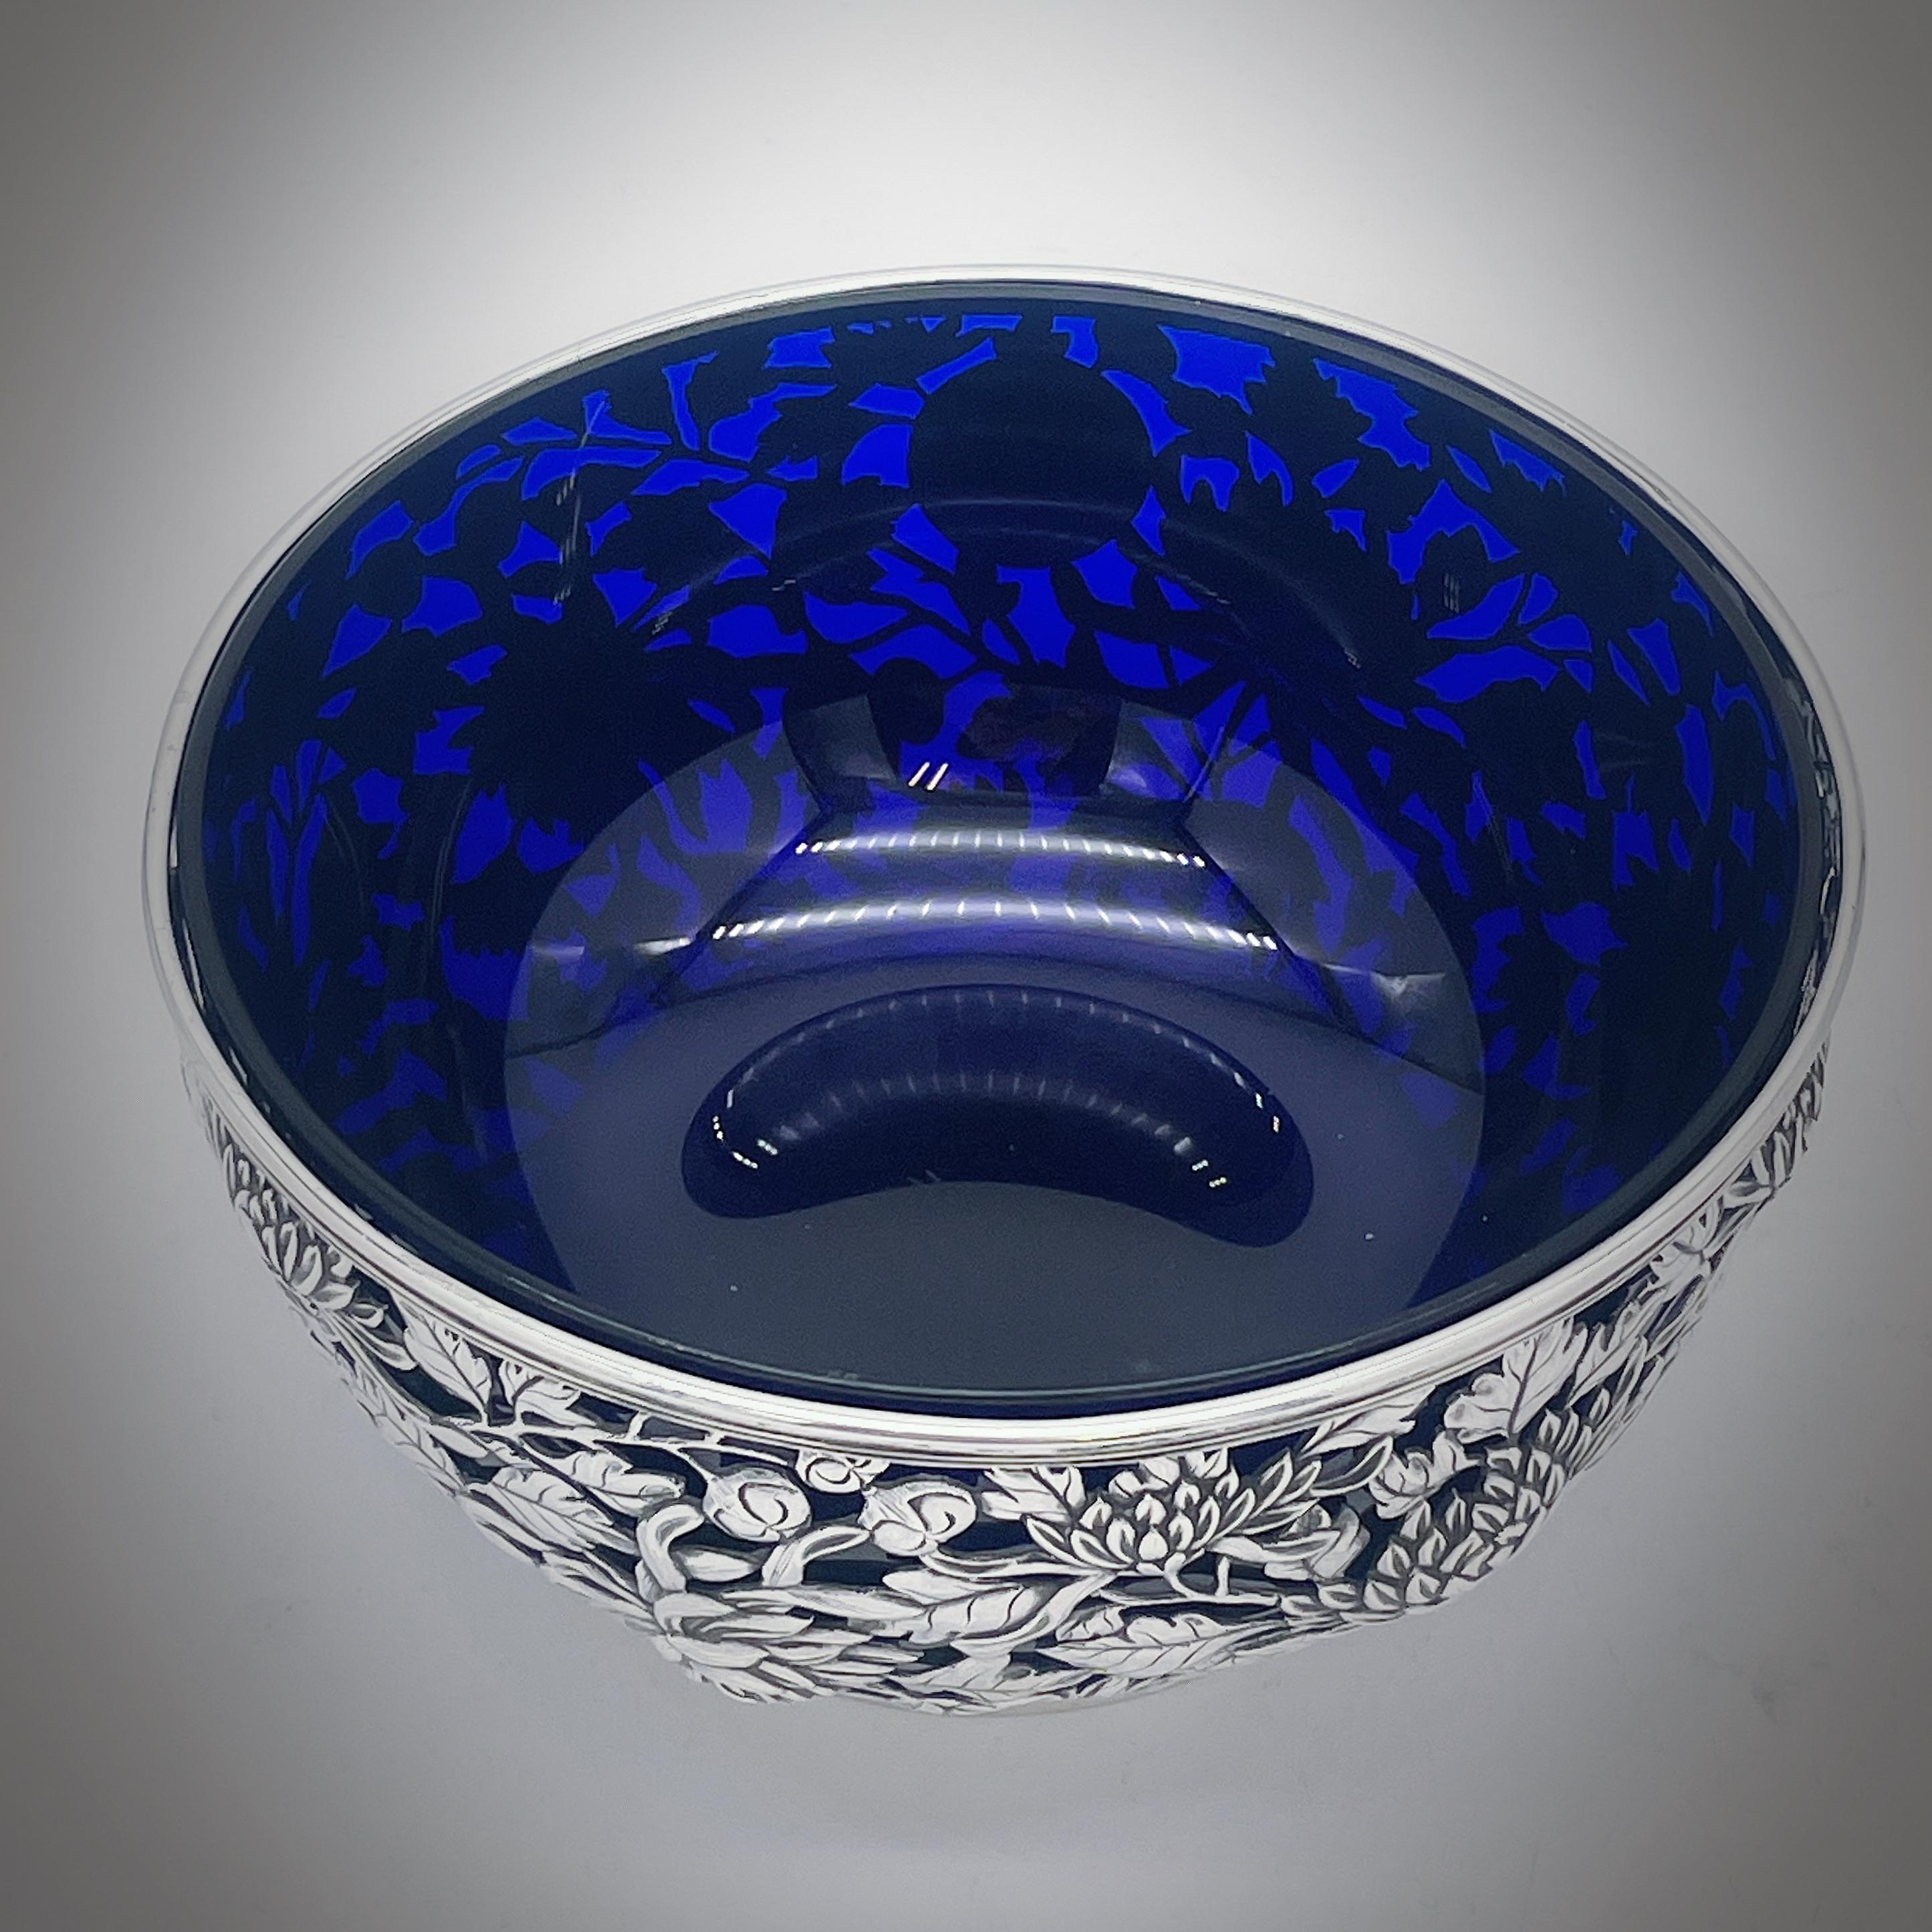 A Chinese export silver bowl circa 1890, with later blue glass liner. The bowl is pierced with wonderfully detailed chrysanthemum decoration, has a vacant round cartouche, and sits on a plain collet foot. The bowl was retailed by Chong Woo, '祥和' in